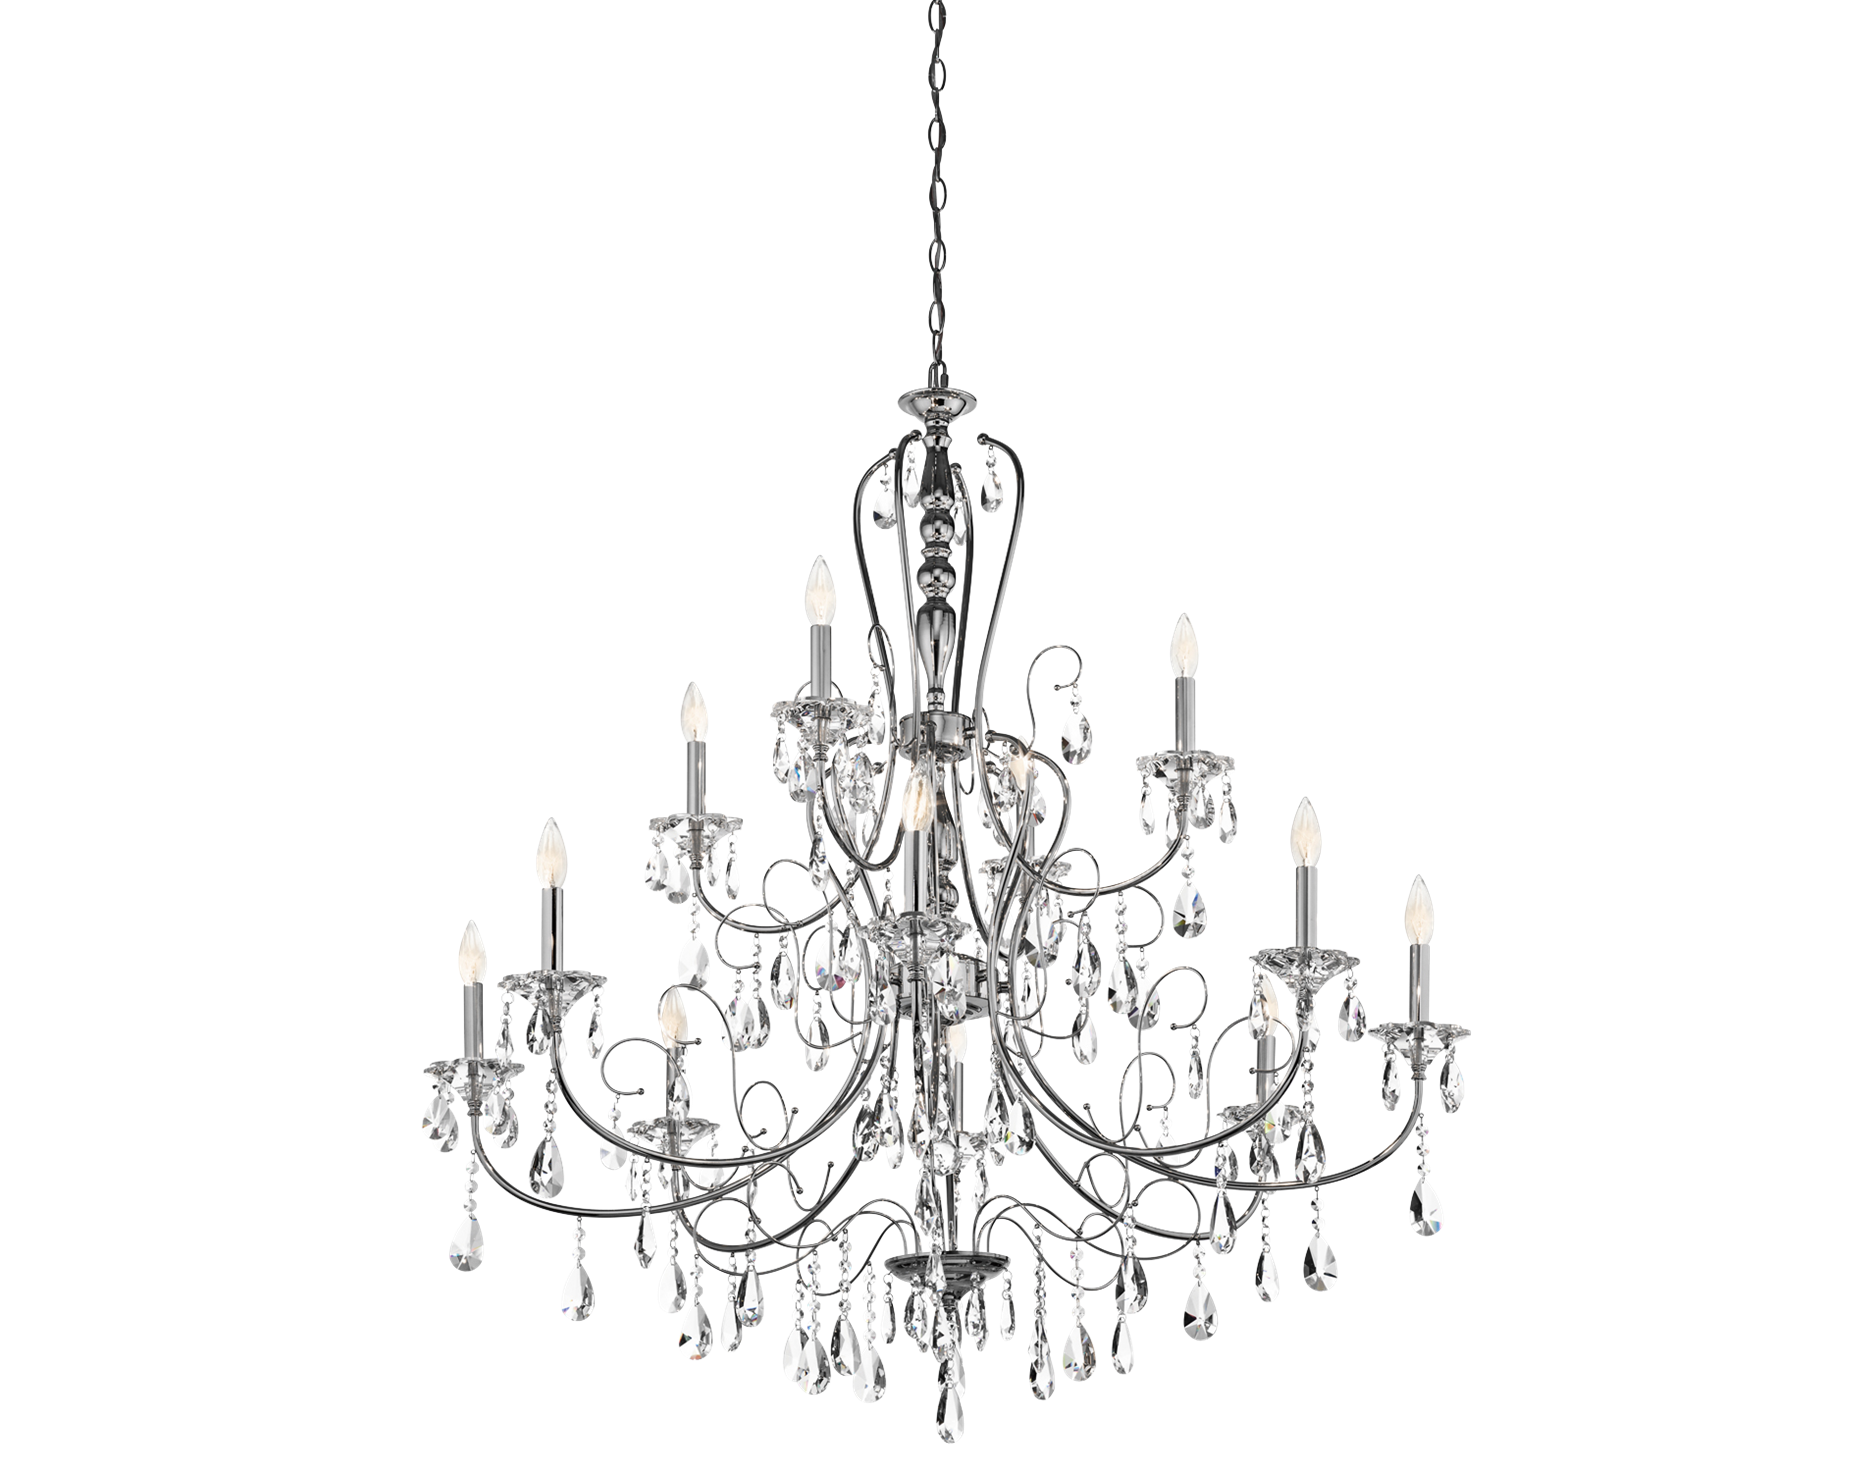 Chandelier Photos Free Clipart HQ PNG Image